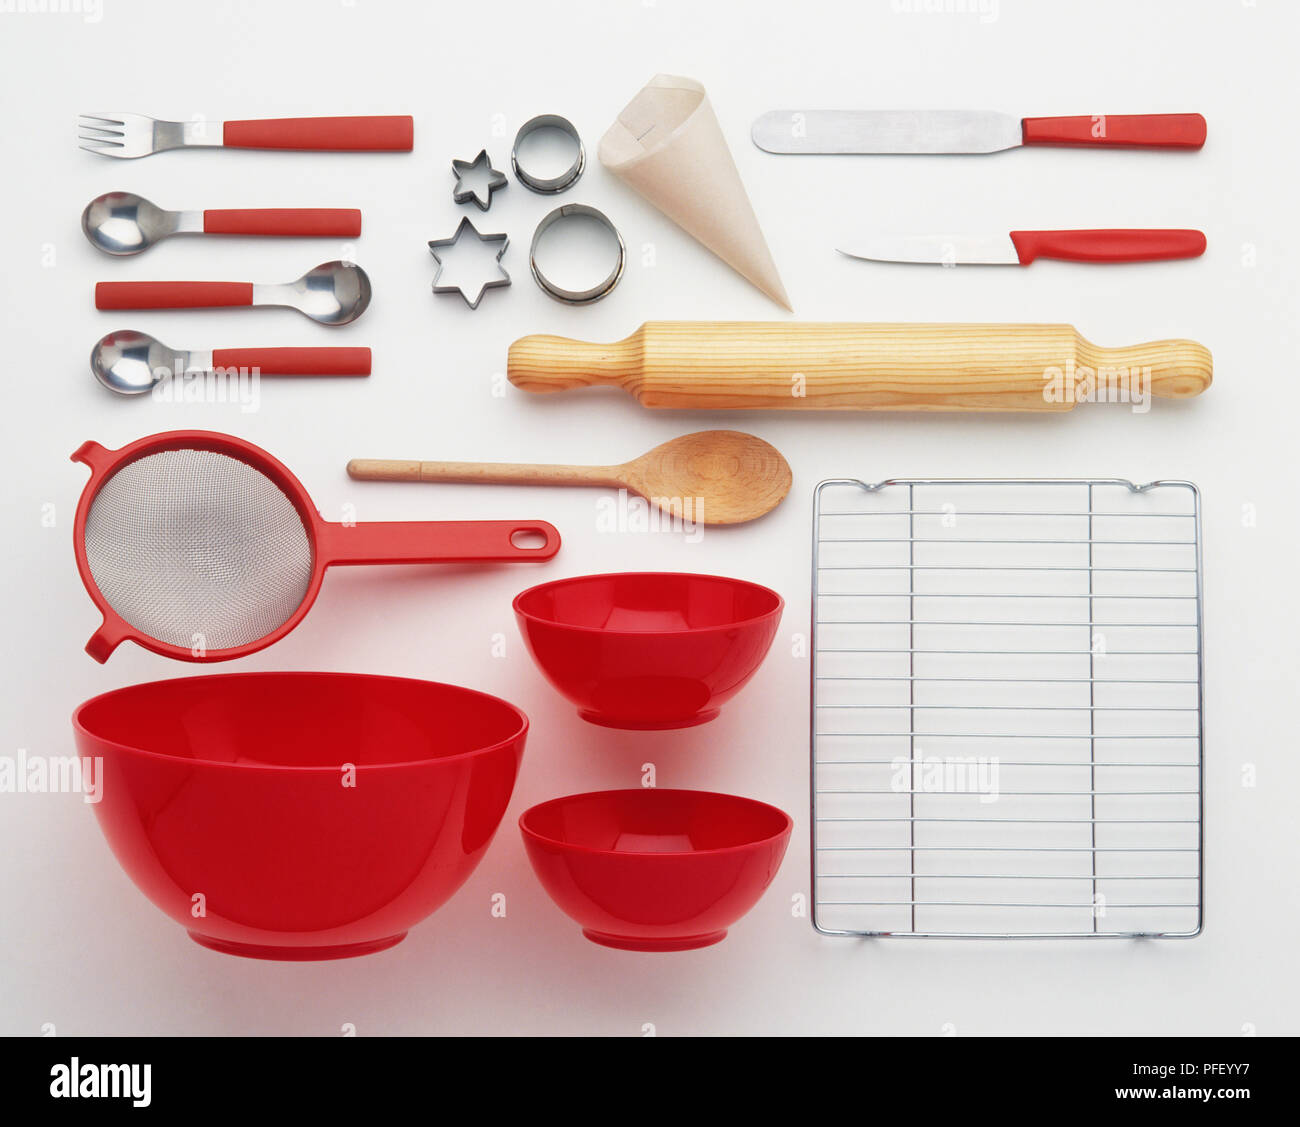 Baking utensils, including bowls, sieve, rolling pin, funnel, wooden spoon, wire rack, cookie cutter, cutlery Stock Photo